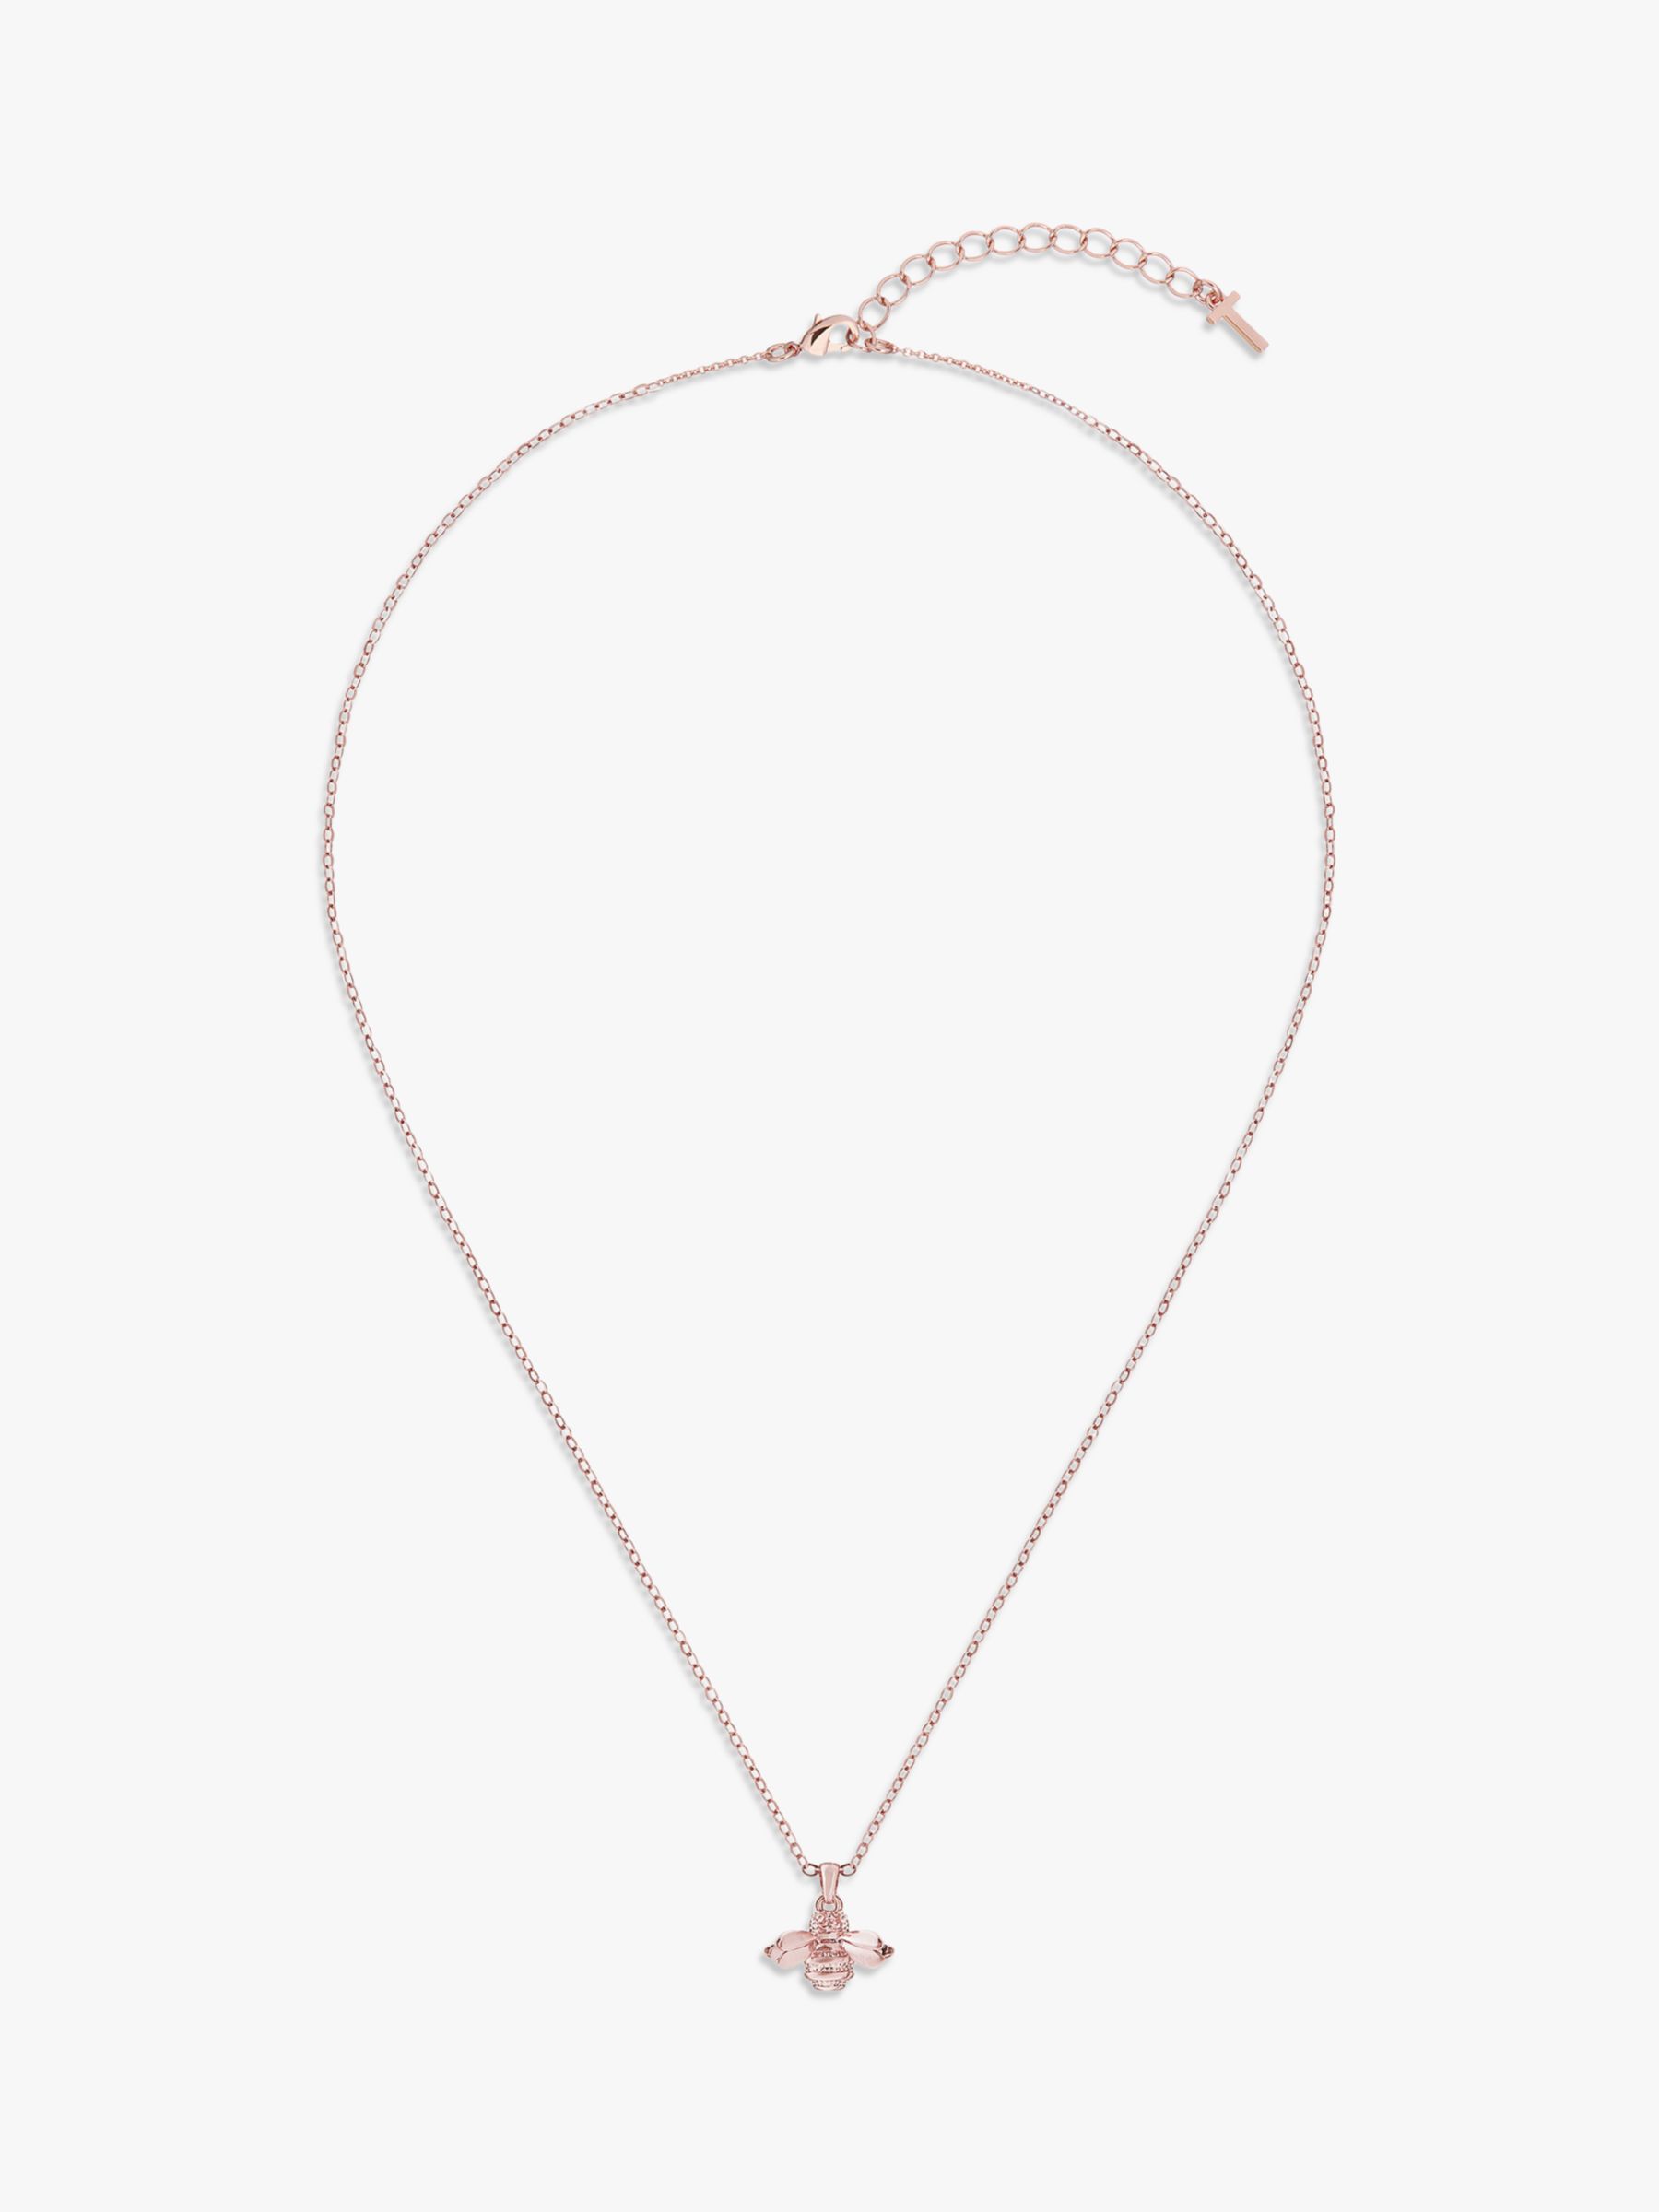 Ted Baker Bellema Bumble Bee Pendant Necklace, Rose Gold at John Lewis ...